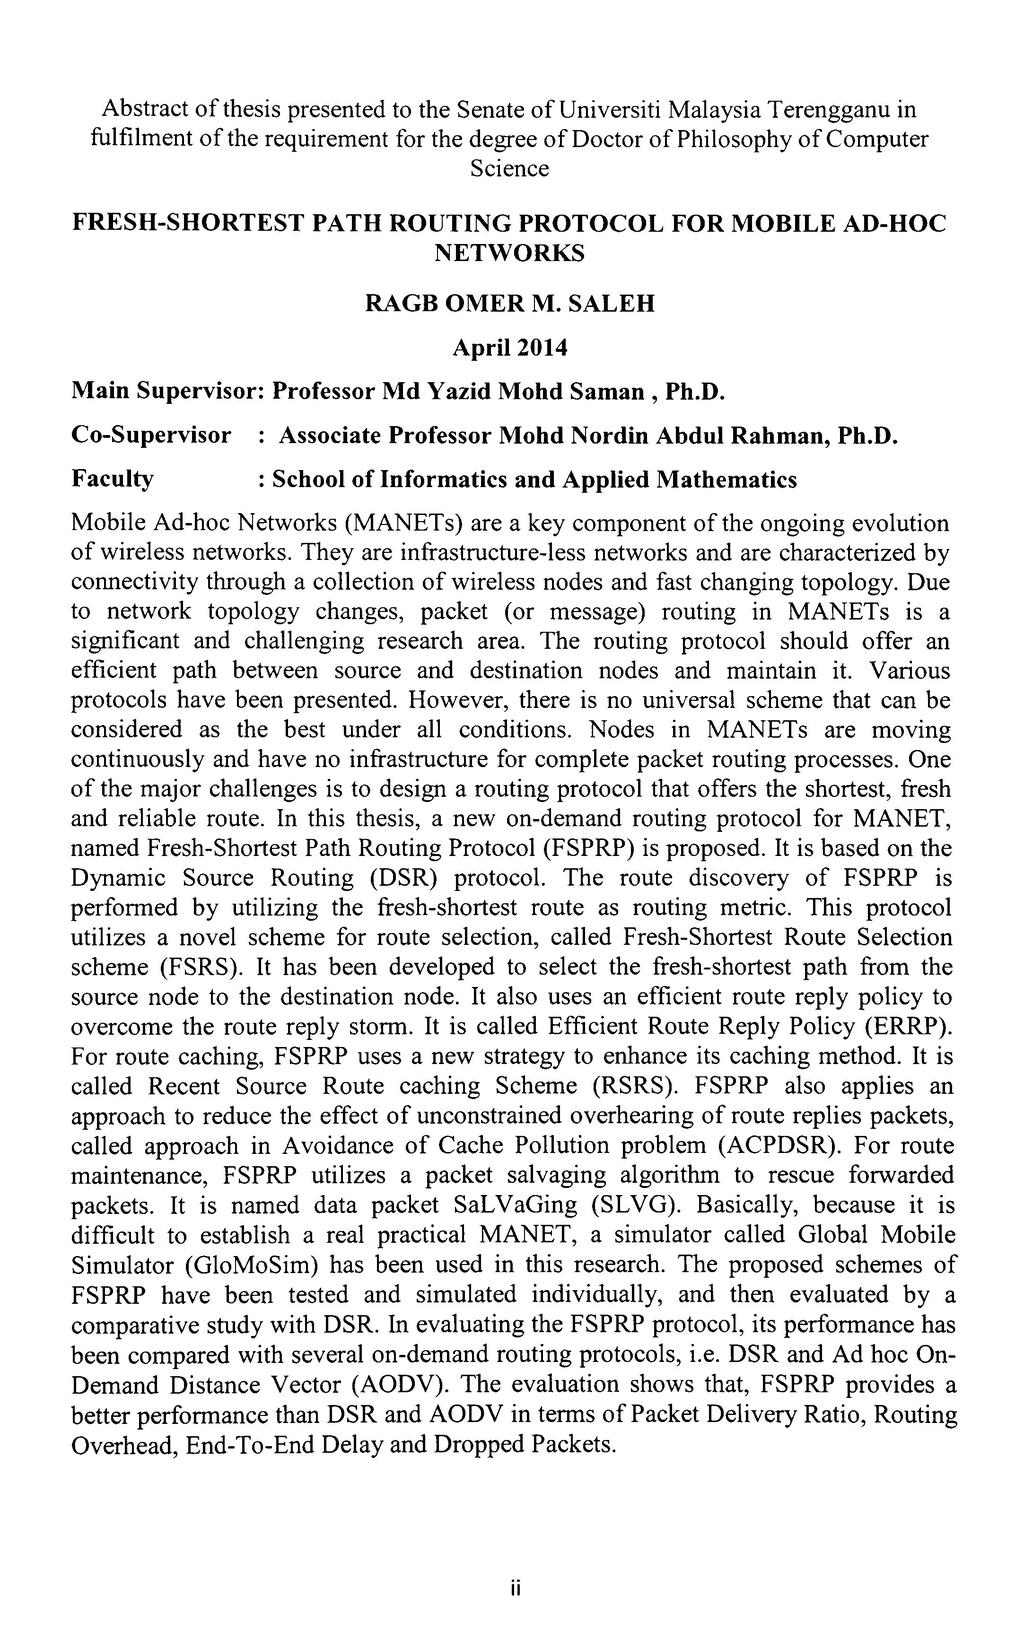 Abstract of thesis presented to the Senate ofuniversiti Malaysia Terengganu in requirement for the degree of Doctor of Philosophy of Computer fulfilment of the Science FRES-SORTEST PAT ROUTNG